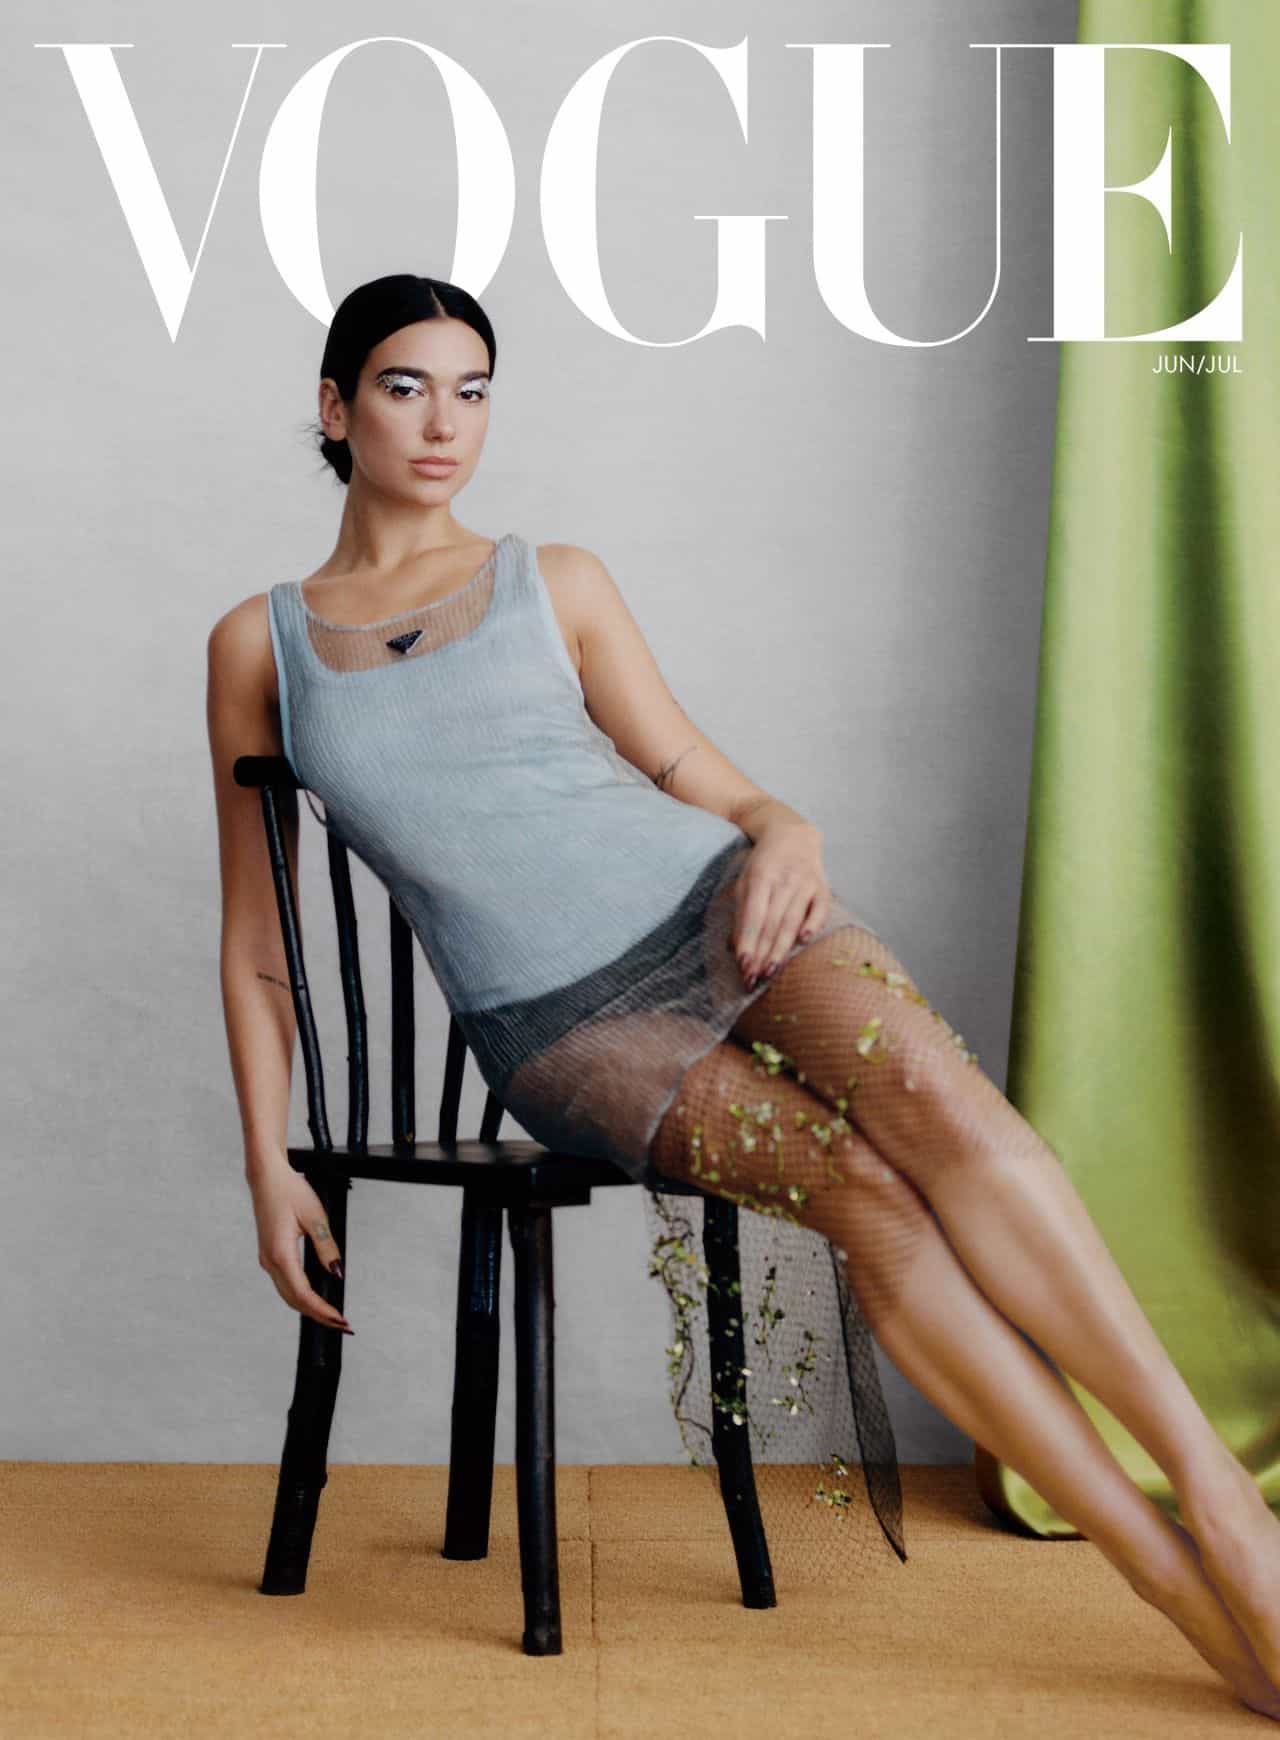 Dua Lipa is the Cover Star for the June/July 2022 Edition of Vogue Magazine